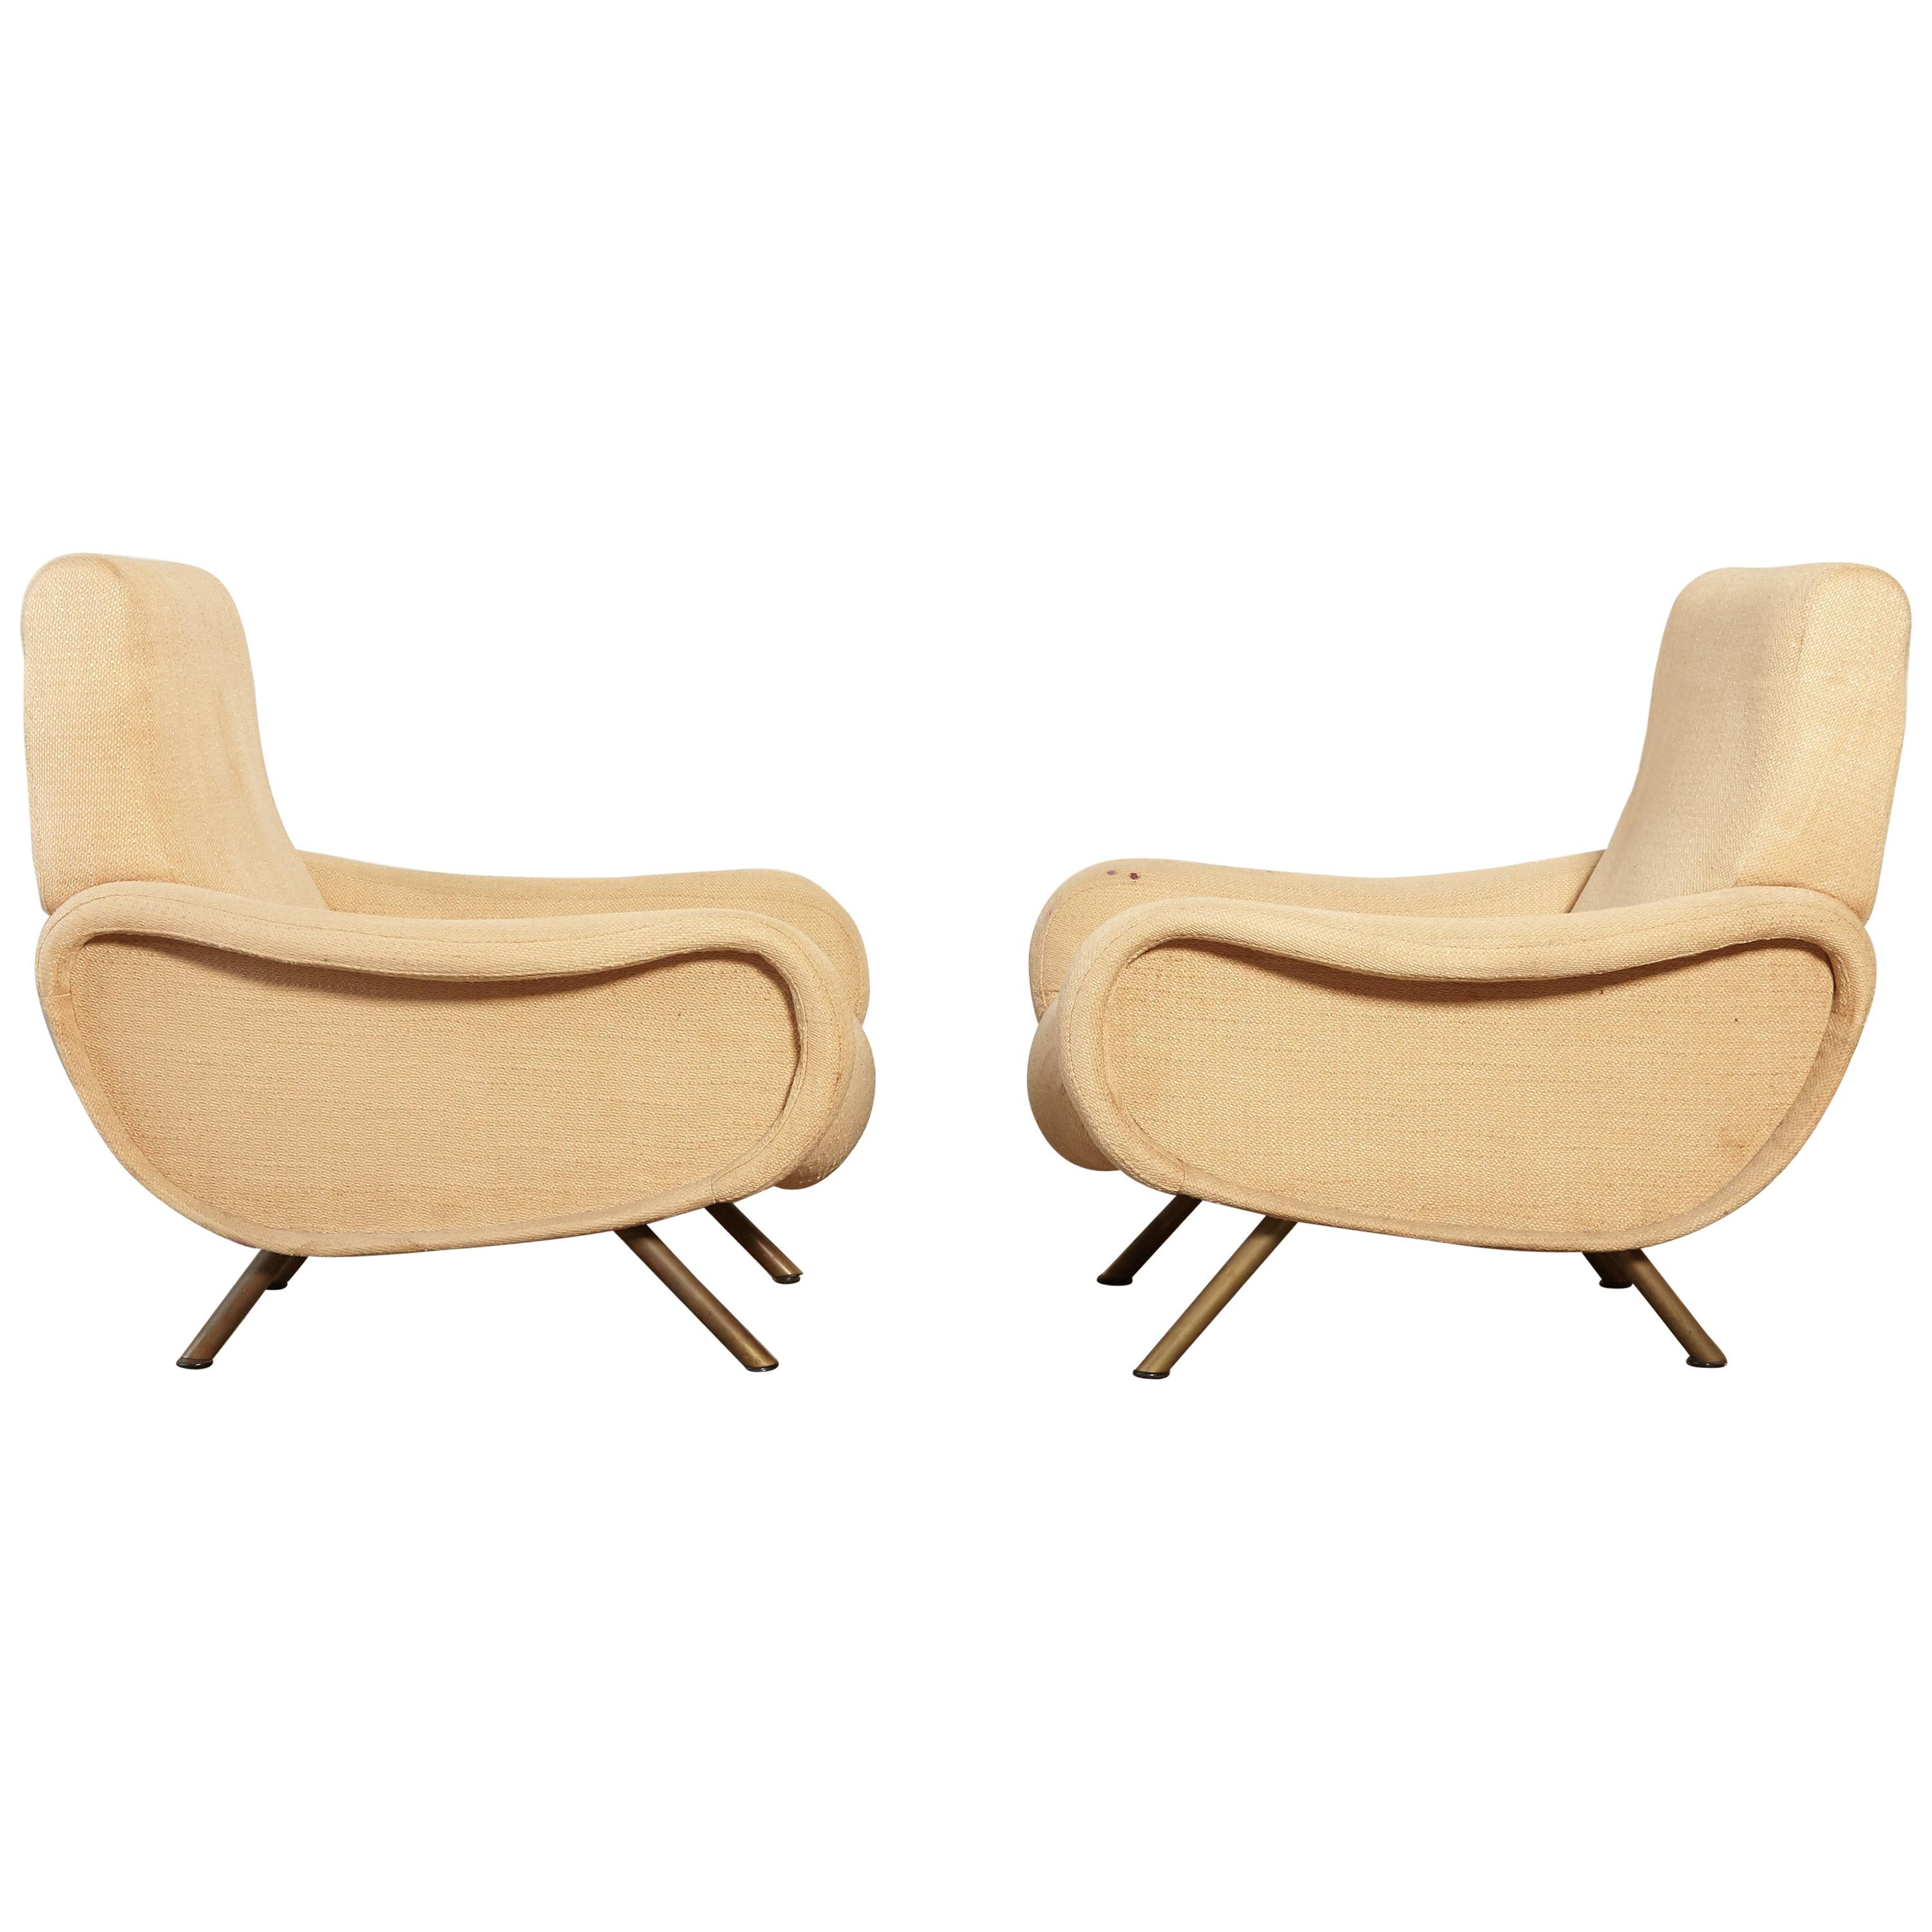 Marco Zanuso Lady Chairs, Arflex, Italy, 1960s 'Complimentary Reupholstery'